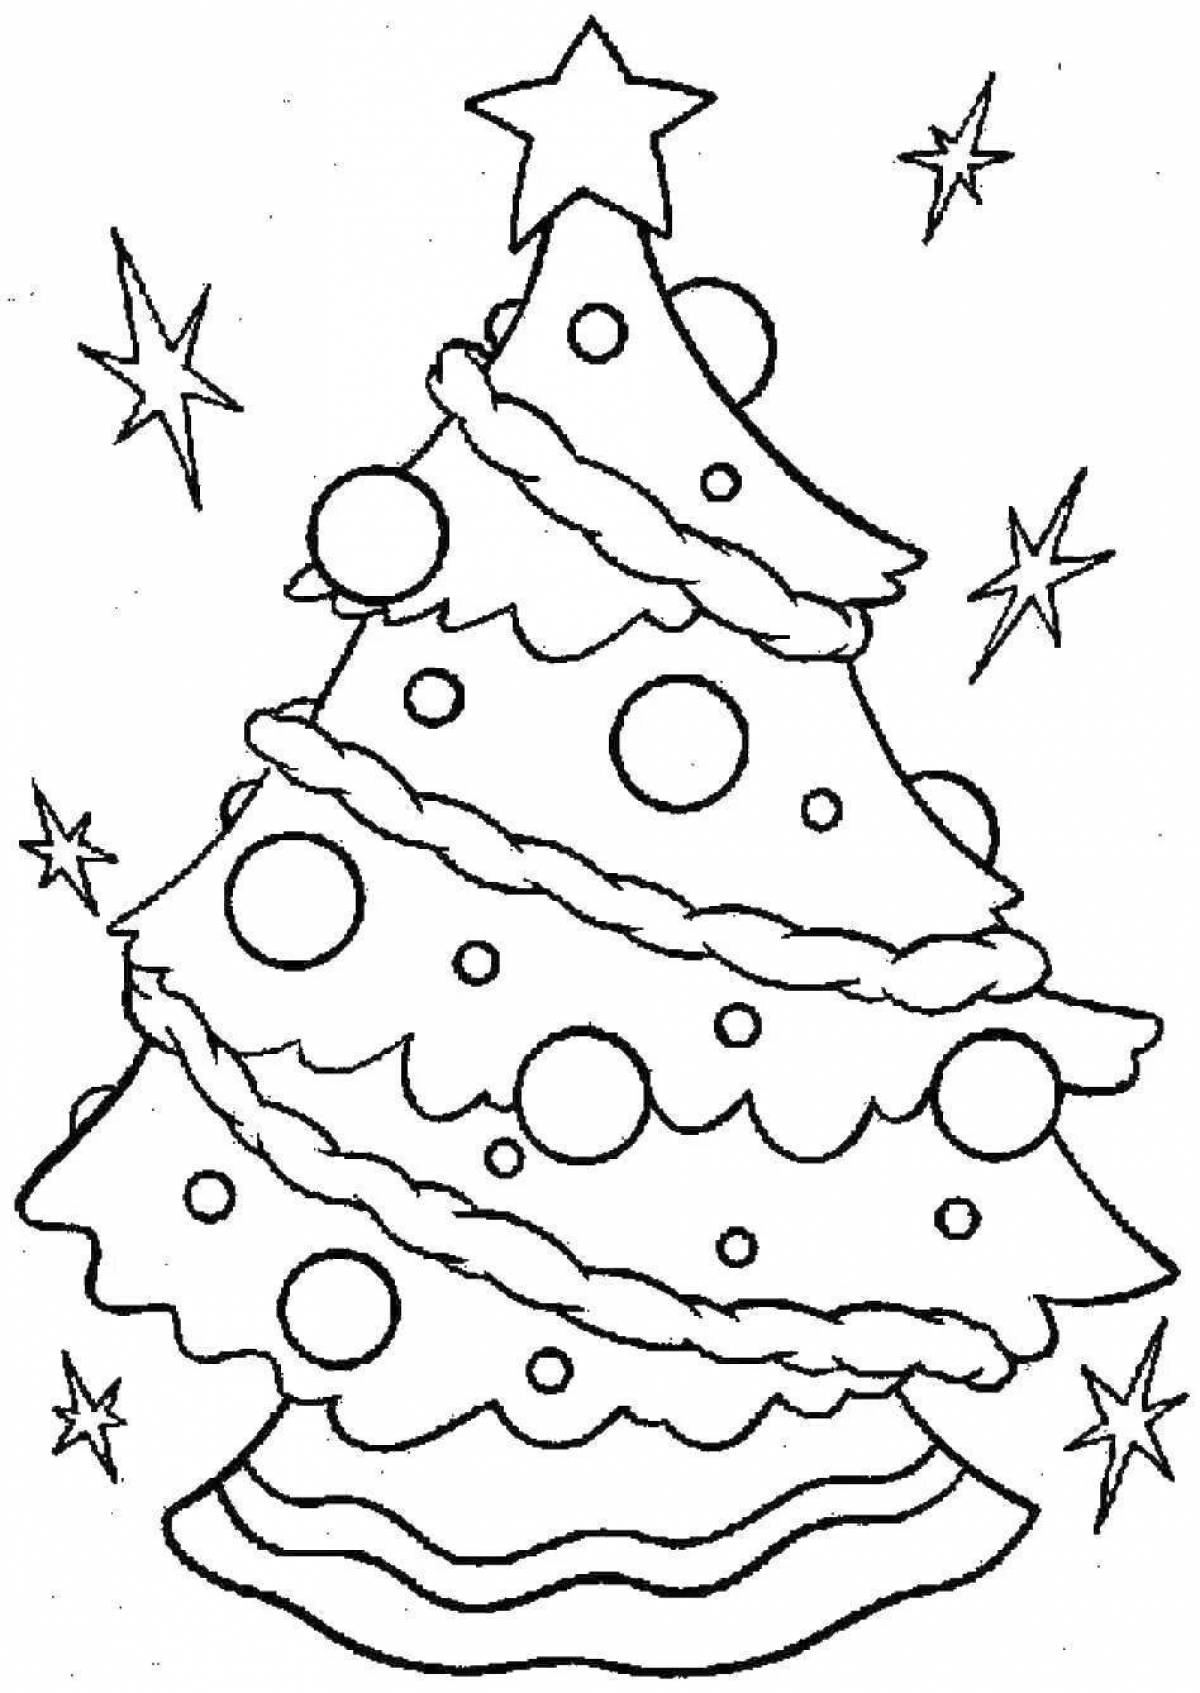 Children's shining Christmas tree coloring book